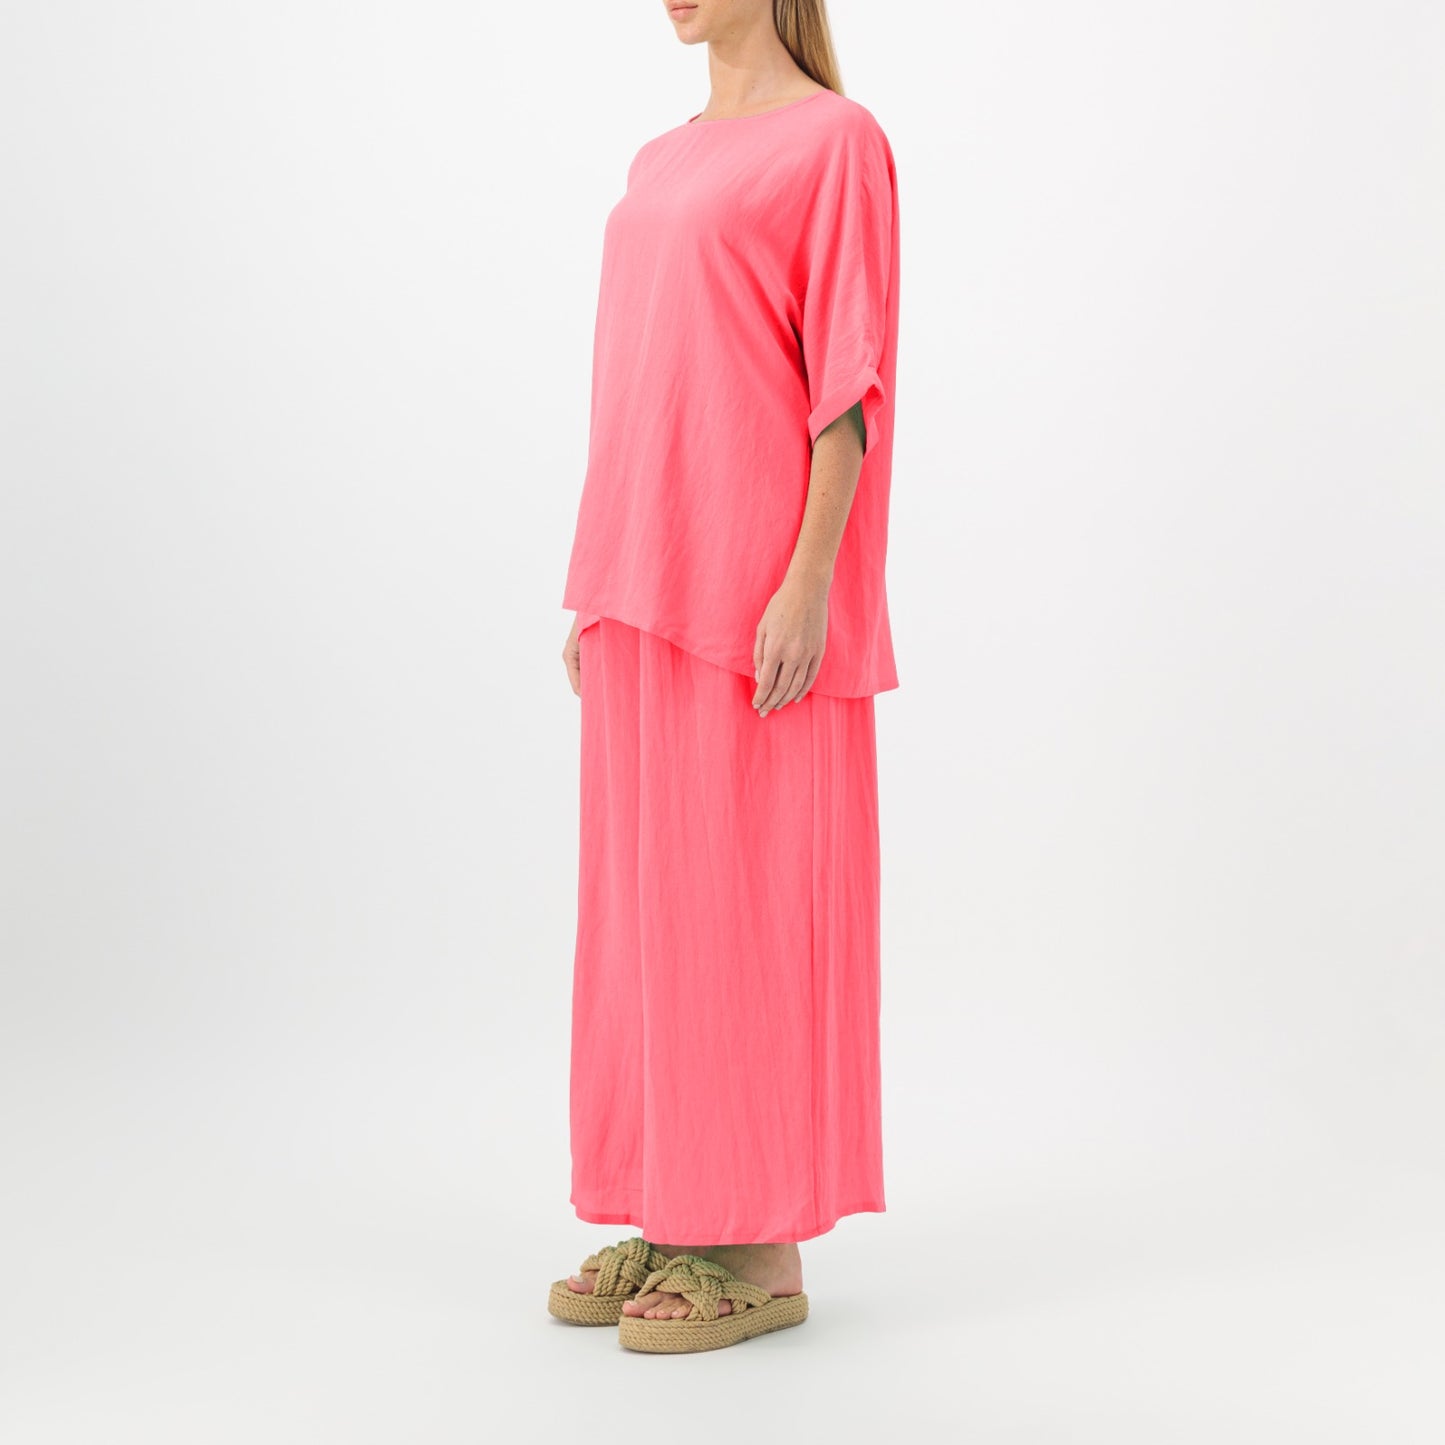  Pink Peach | All Day Casual Set of 2  - Comfortable style in attractive colors -arabian outfit - casual setcasual set - all day outfits - closet fashion store